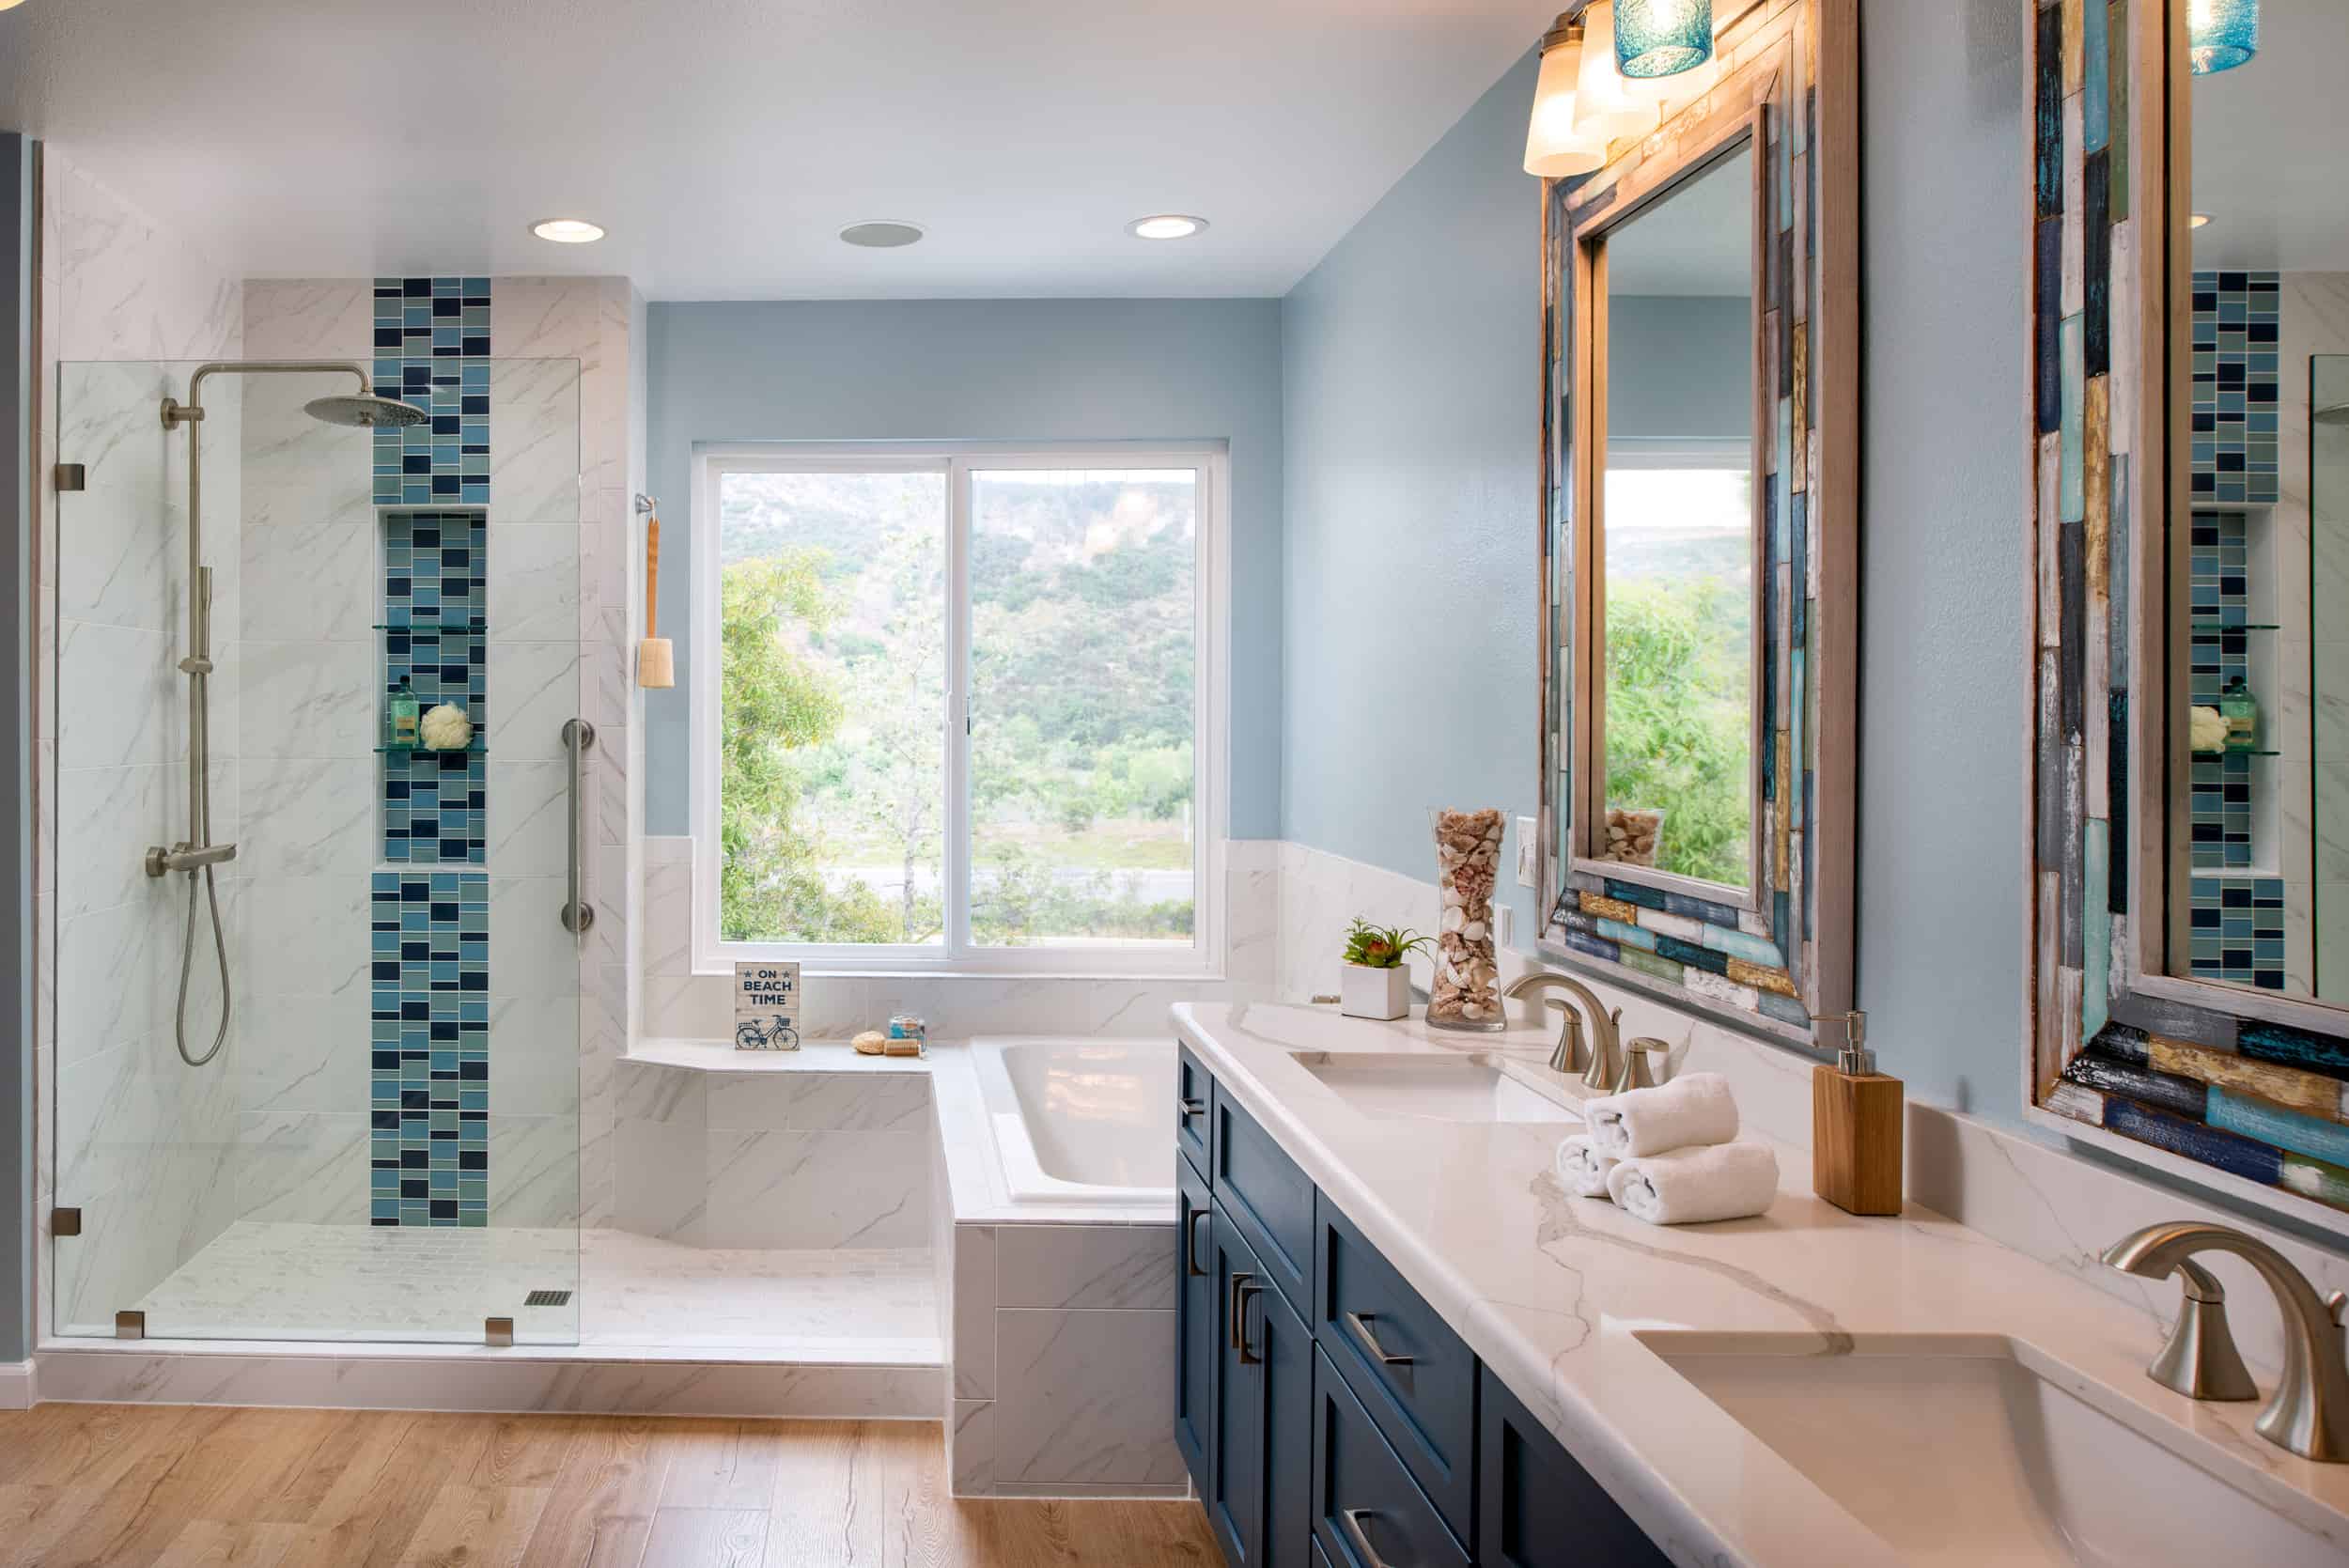 Cost Of Adding A Bathroom Remodel Works, Average Cost Of Adding A Bedroom And Bathroom To House